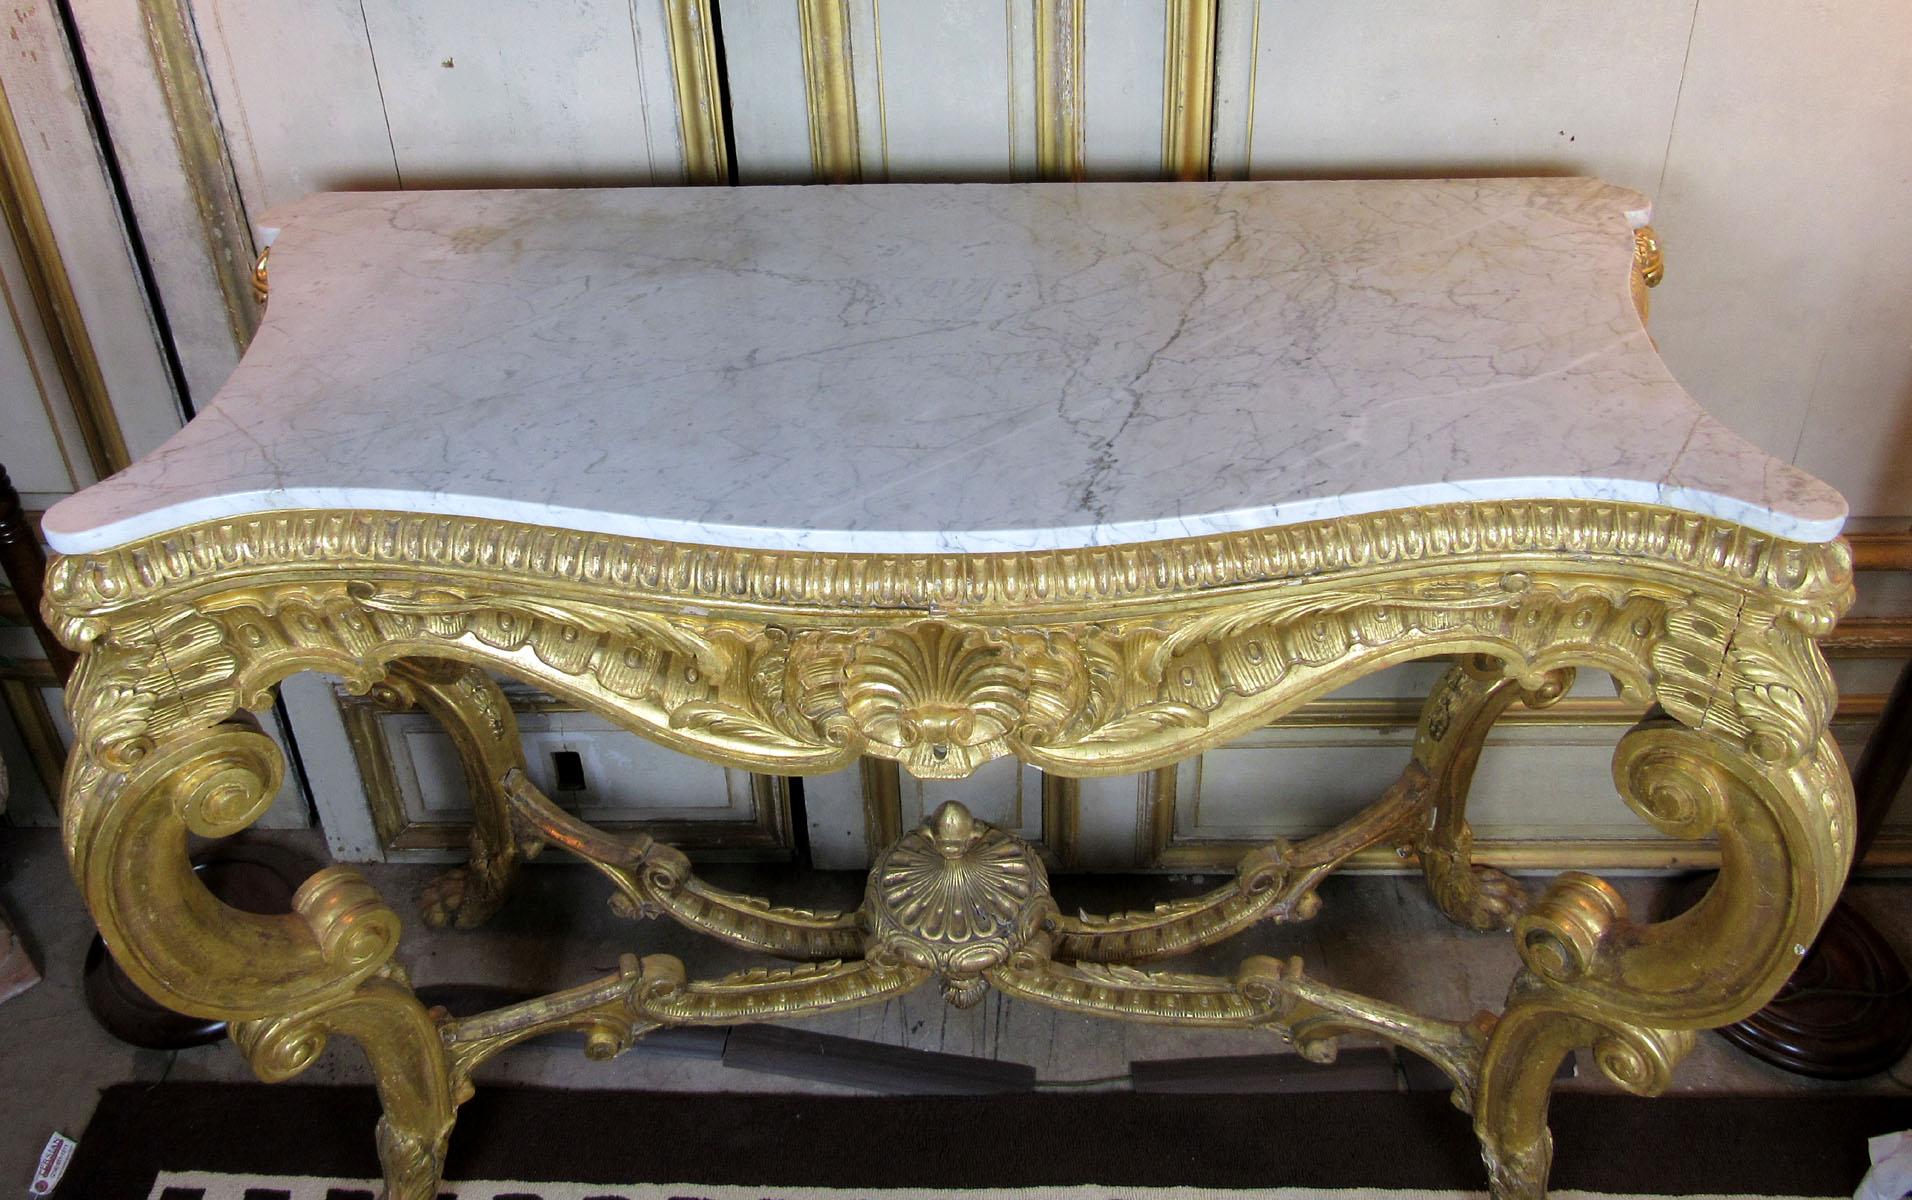 Very large and tall Louis XV style four-legged giltwood console with Carrara marble top.
Restored gilding and marble.